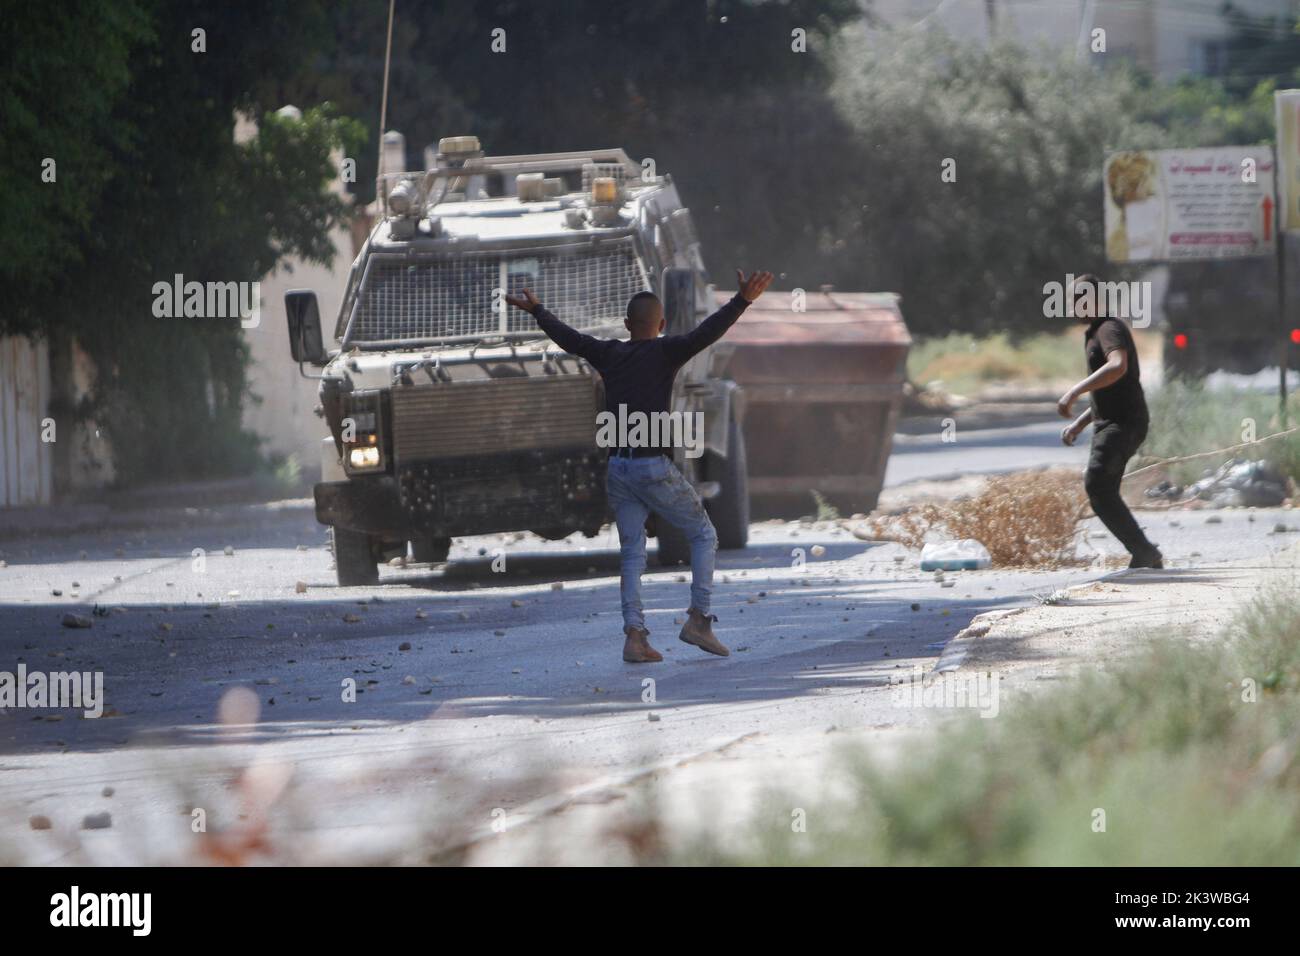 Jenin, Palestine. 28th Sep, 2022. Palestinian protesters throw stones at the Israeli army vehicles following a deadly raid in the city of Jenin in the occupied West Bank. The Israeli army bombed a house and killed 4 Palestinians, wounding dozens during this deadly raid. Credit: SOPA Images Limited/Alamy Live News Stock Photo